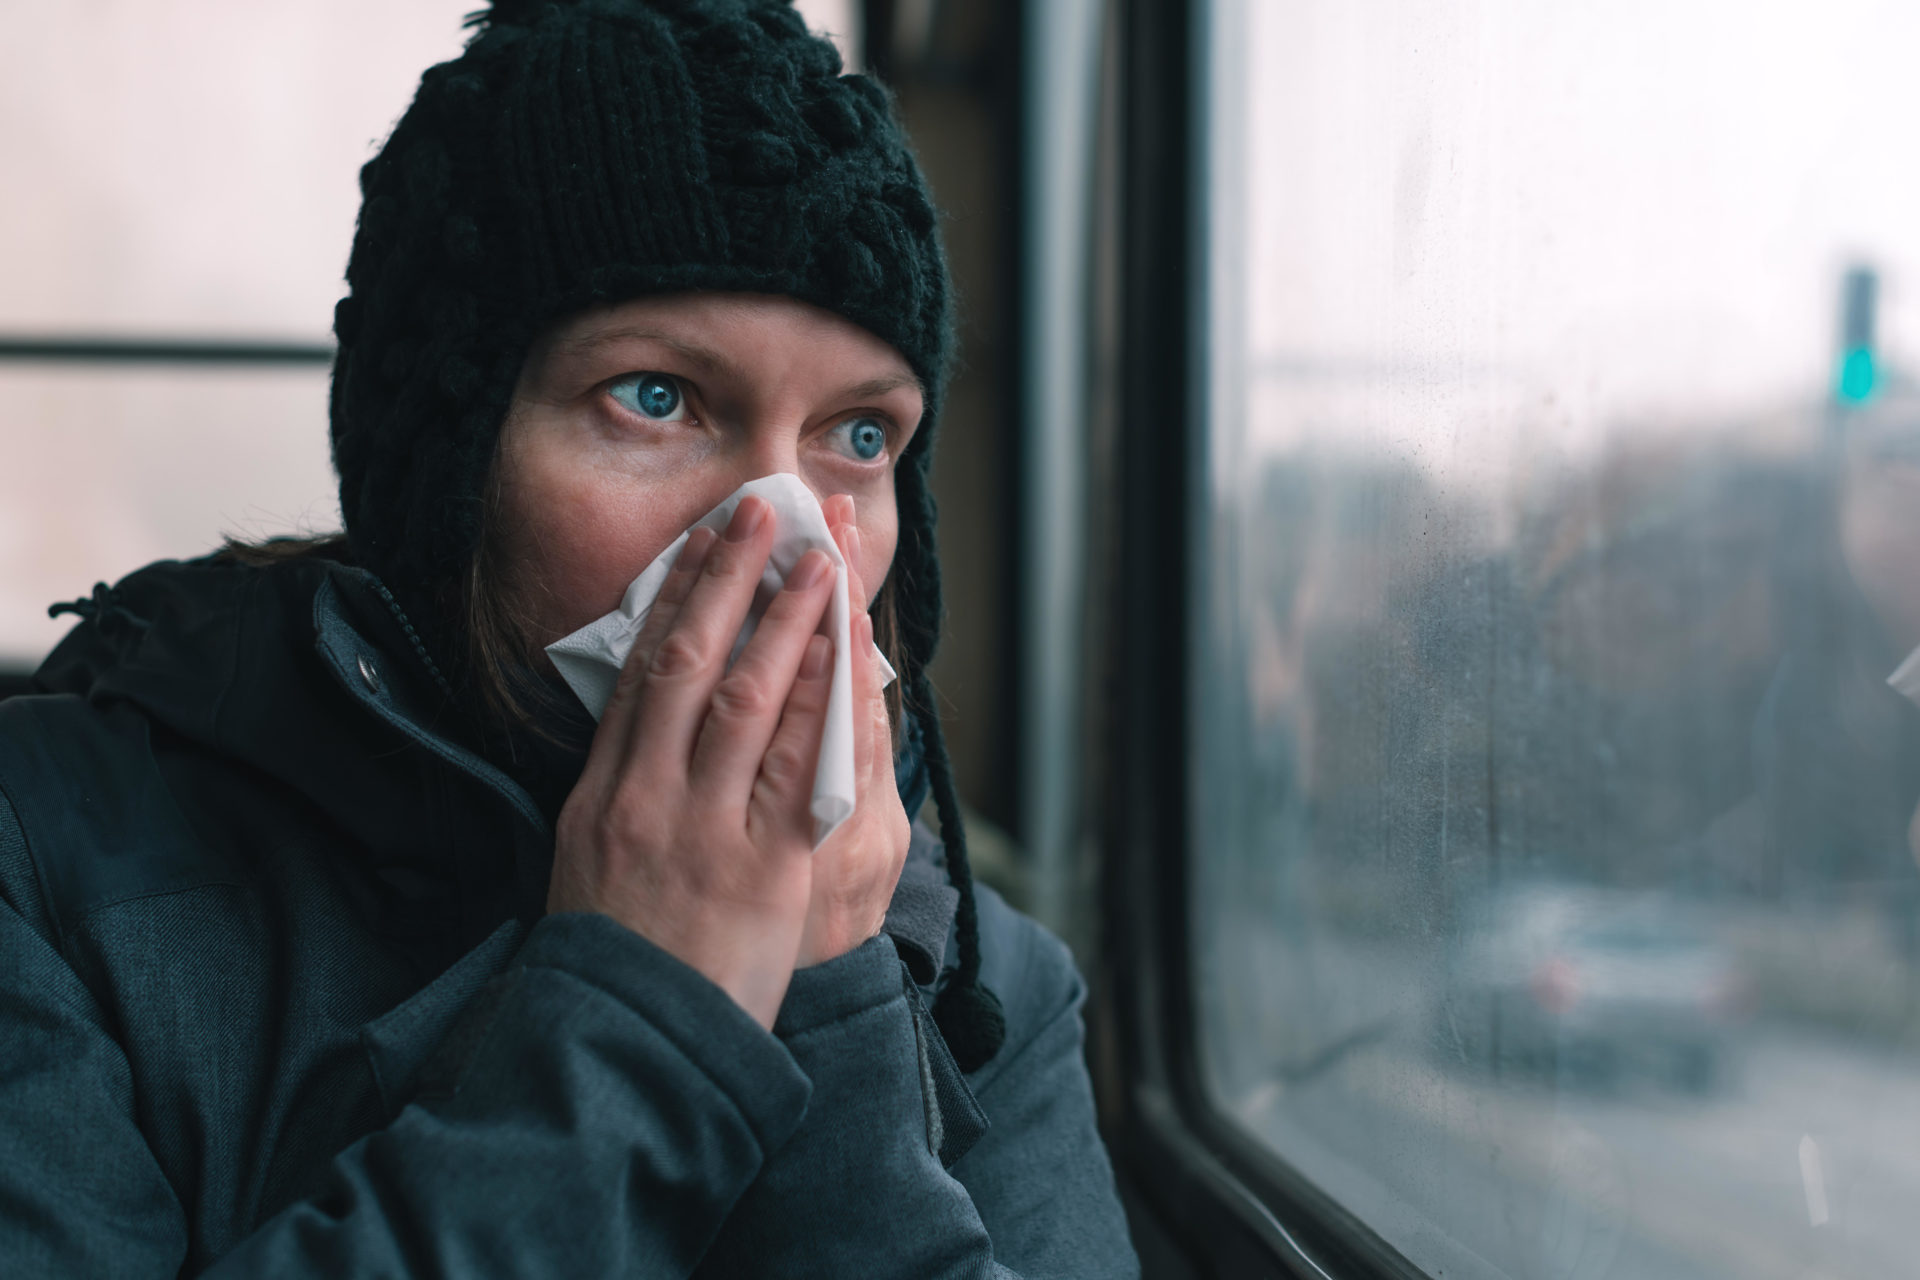 Woman blowing her nose into paper handkerchief on the bus on a cold winter day.